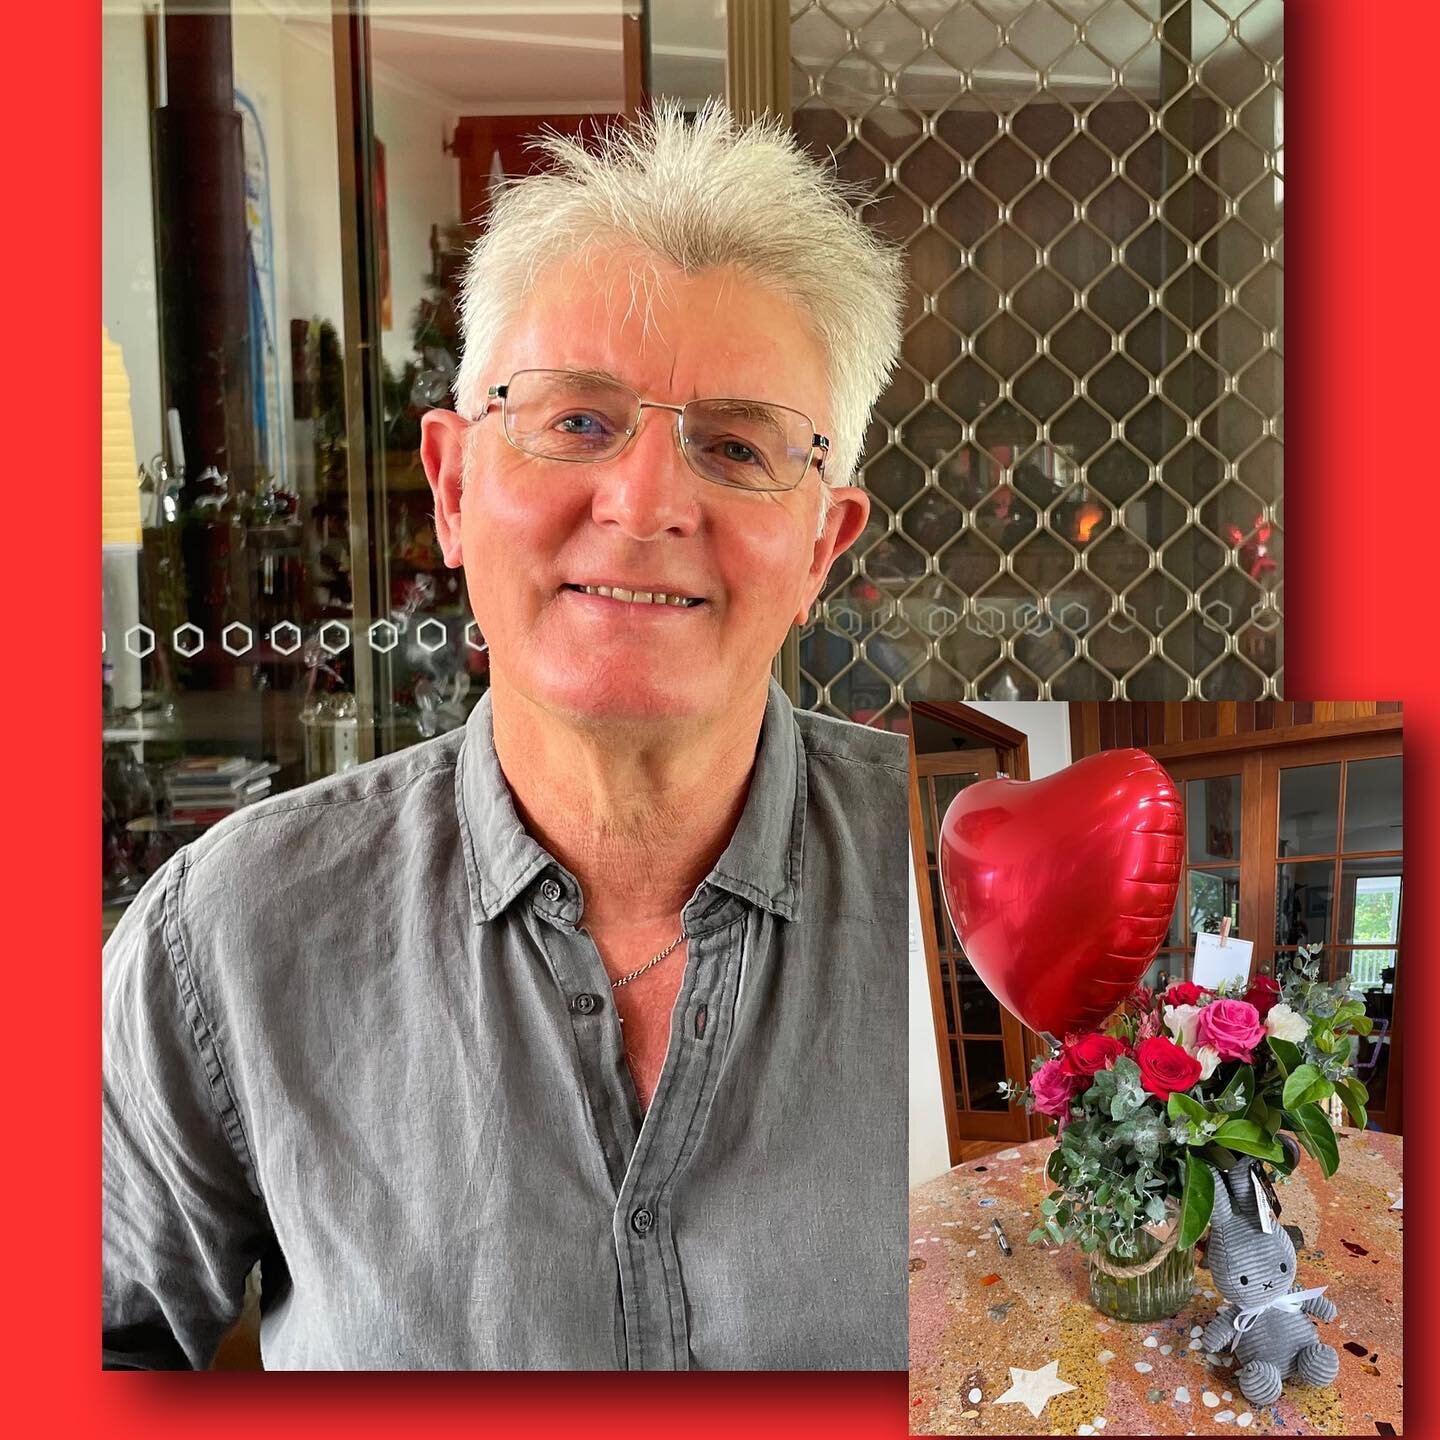 LOVE my Valentine - my best friend, my hubby, my soul mate - a gift from God and a man of God. #valentinesday2022 #loveyou #roses #blessingsonblessings ❤️❤️❤️❤️🙏🙏🙏🙏